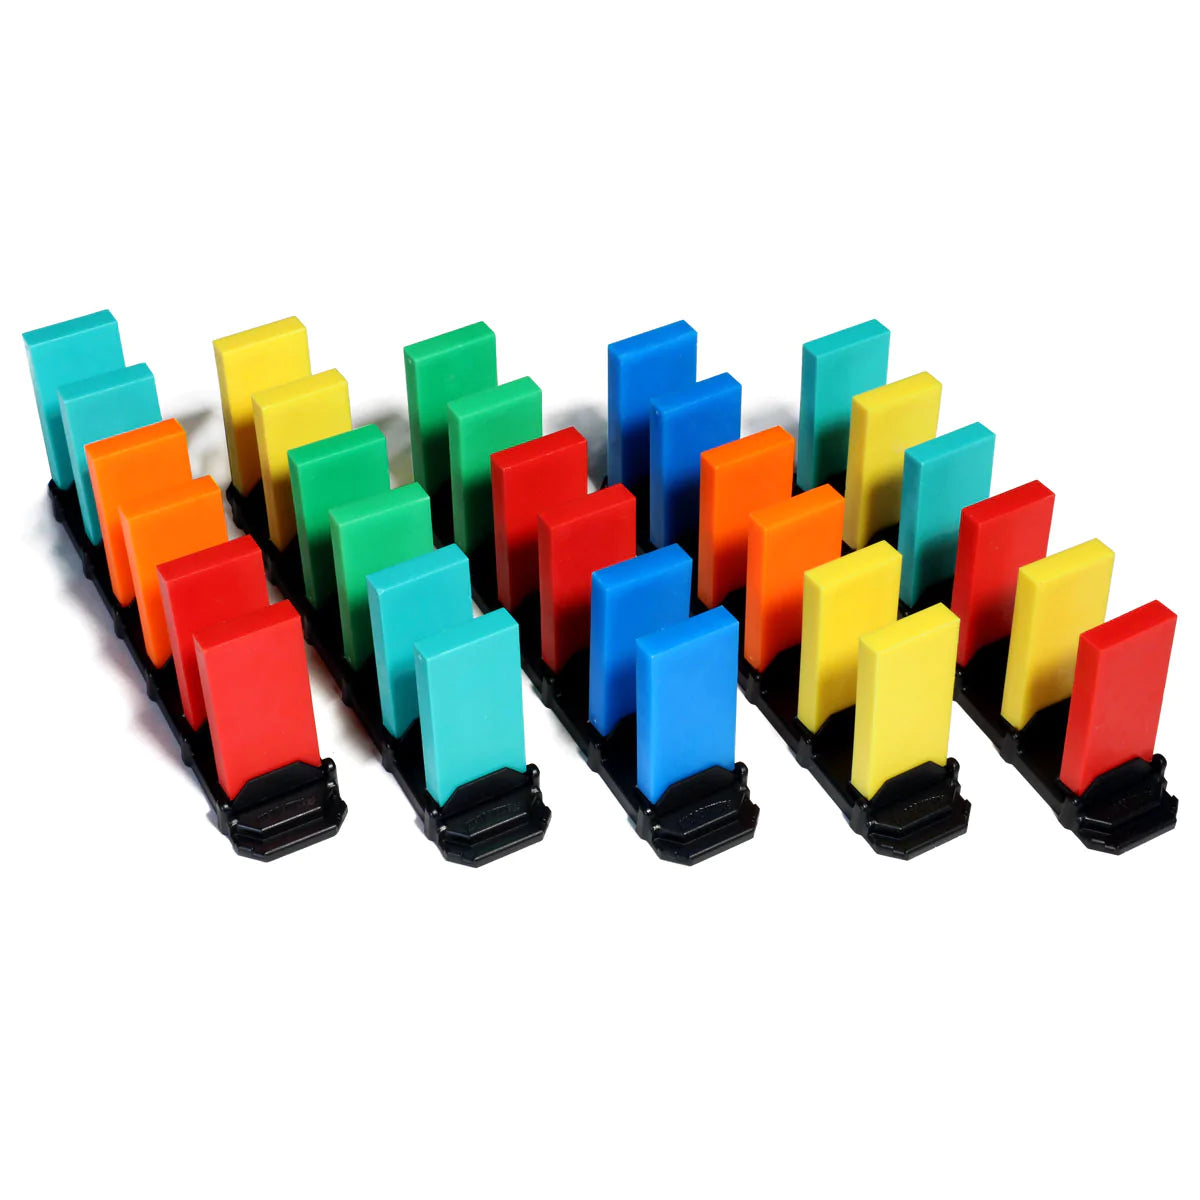 Dominoes - 5 Small Rapid Track Set - Quick Set Up - NO DOMINOES - Bulk Dominoes - Made in the USA - STEM STEAM